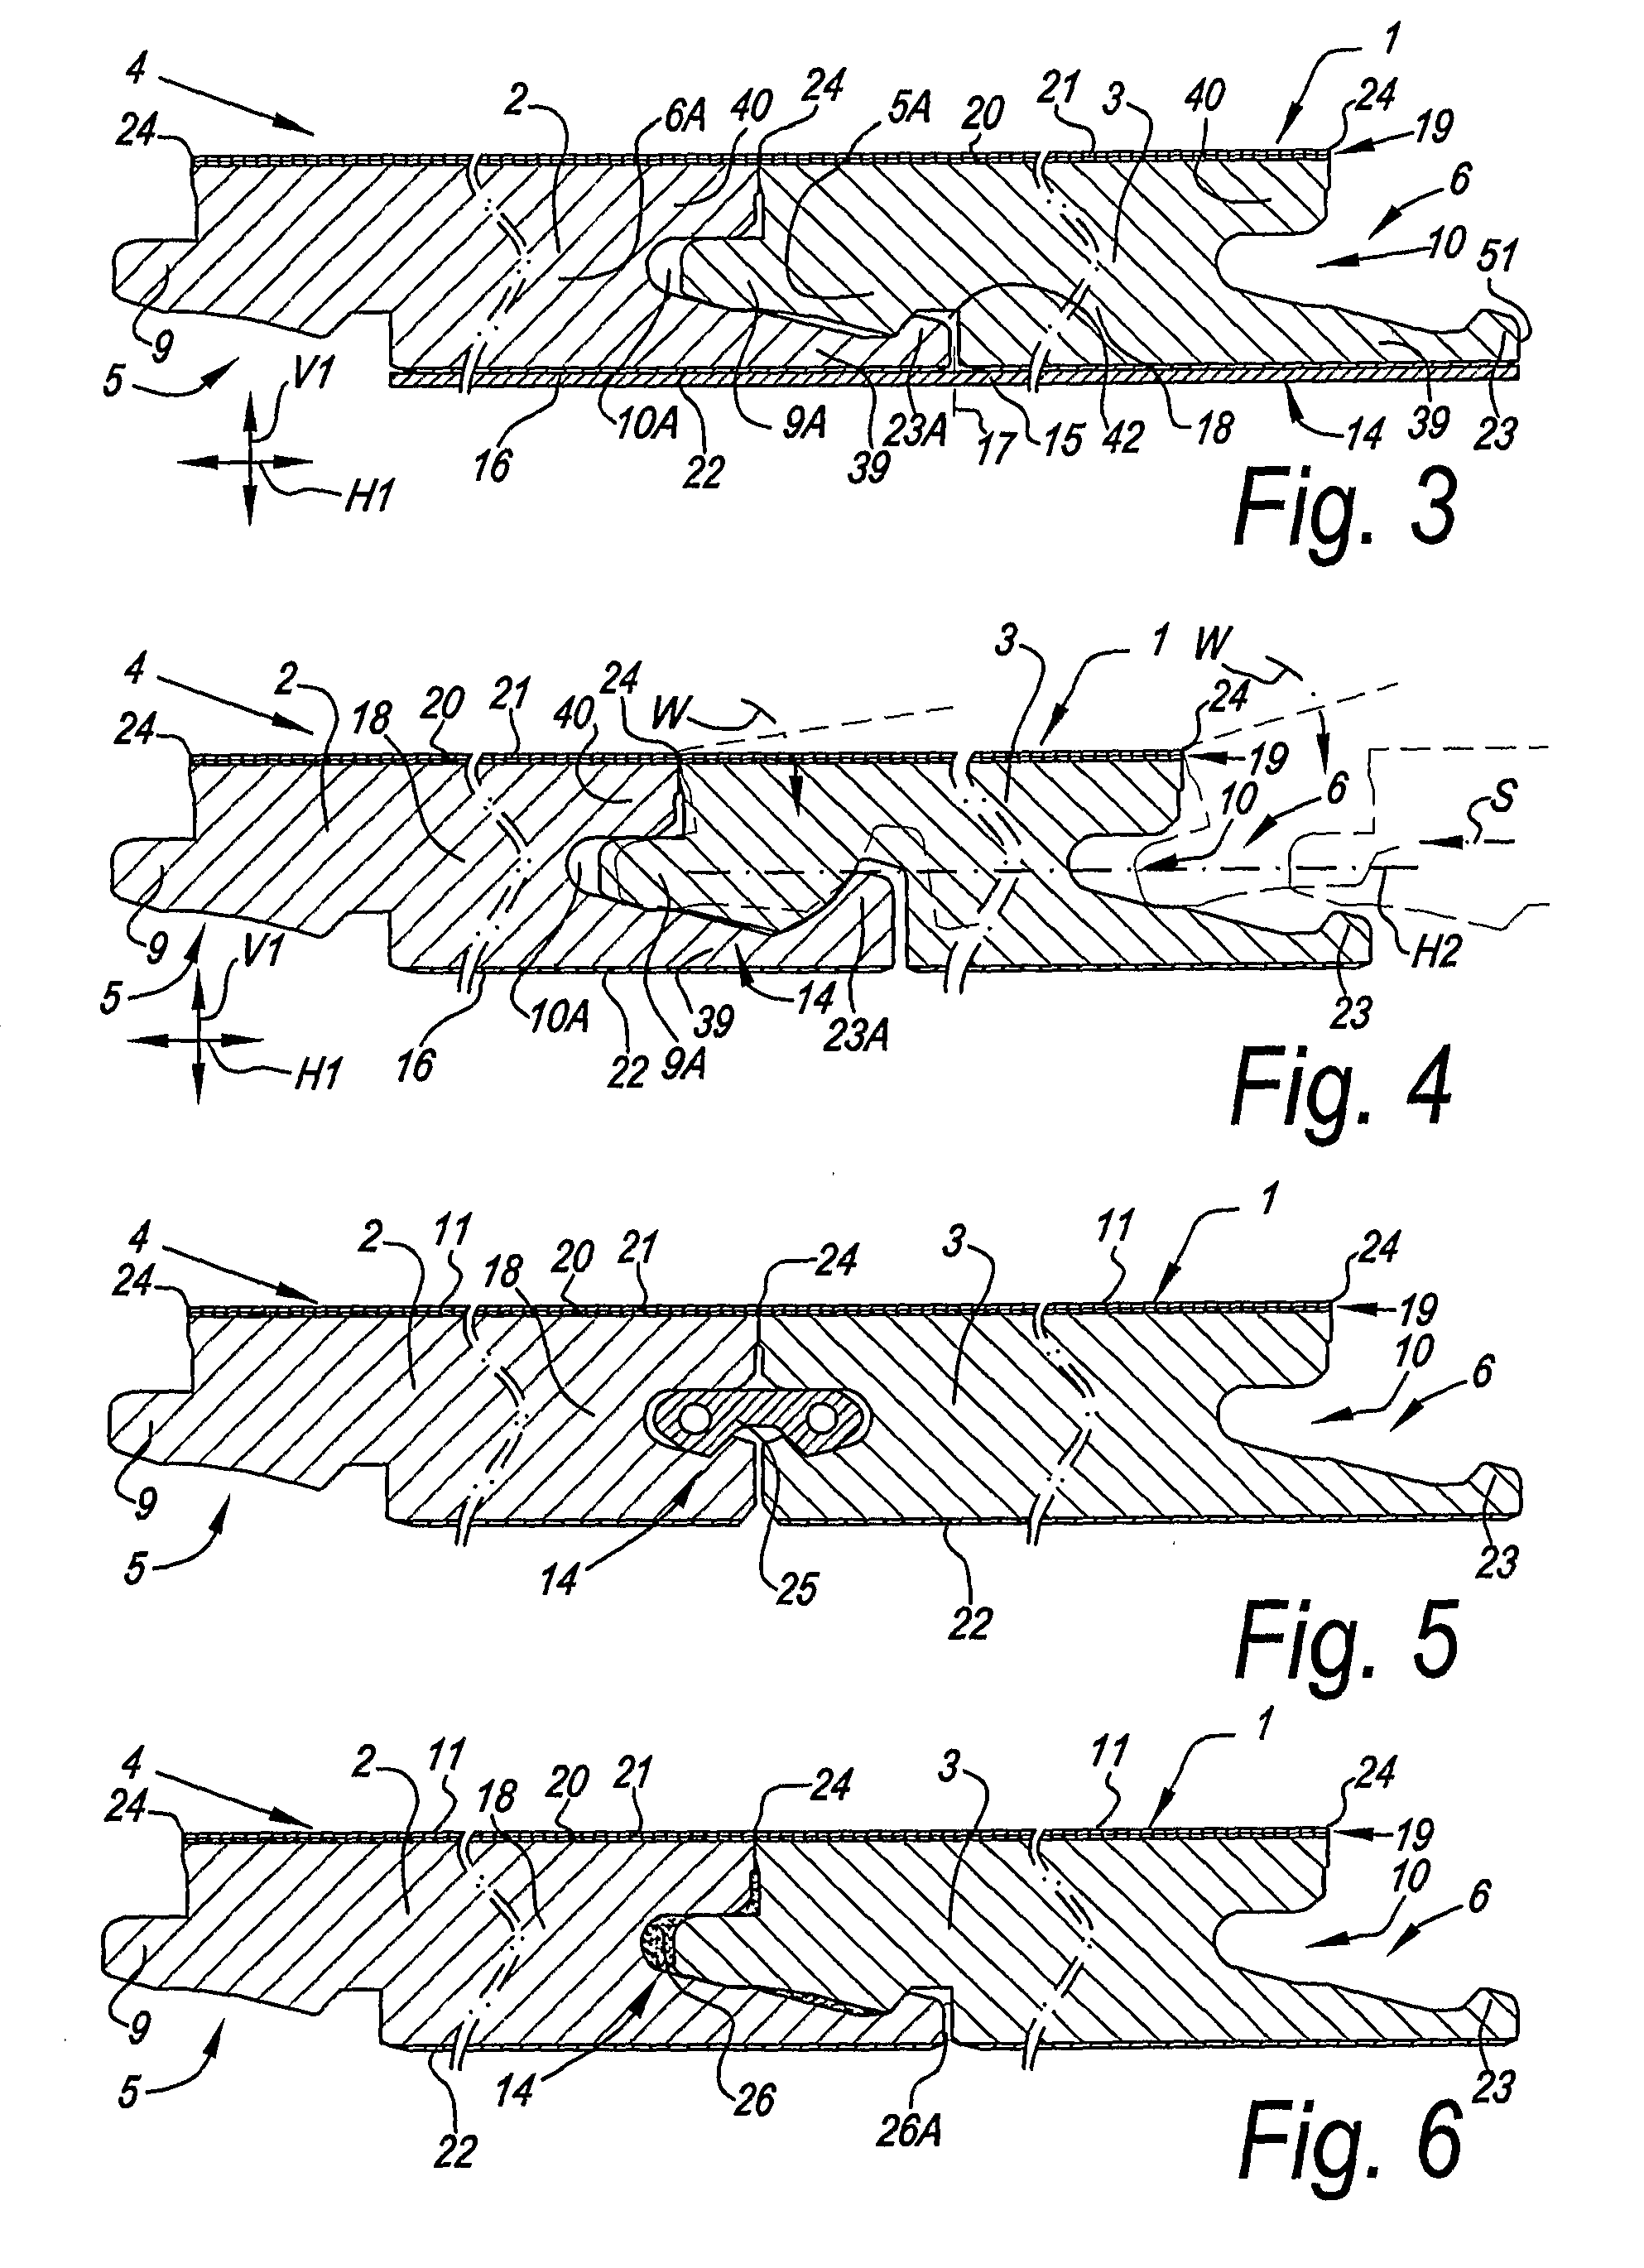 Floor element, locking system for floor elements, floor covering and method for composing such floor elements to a floor covering